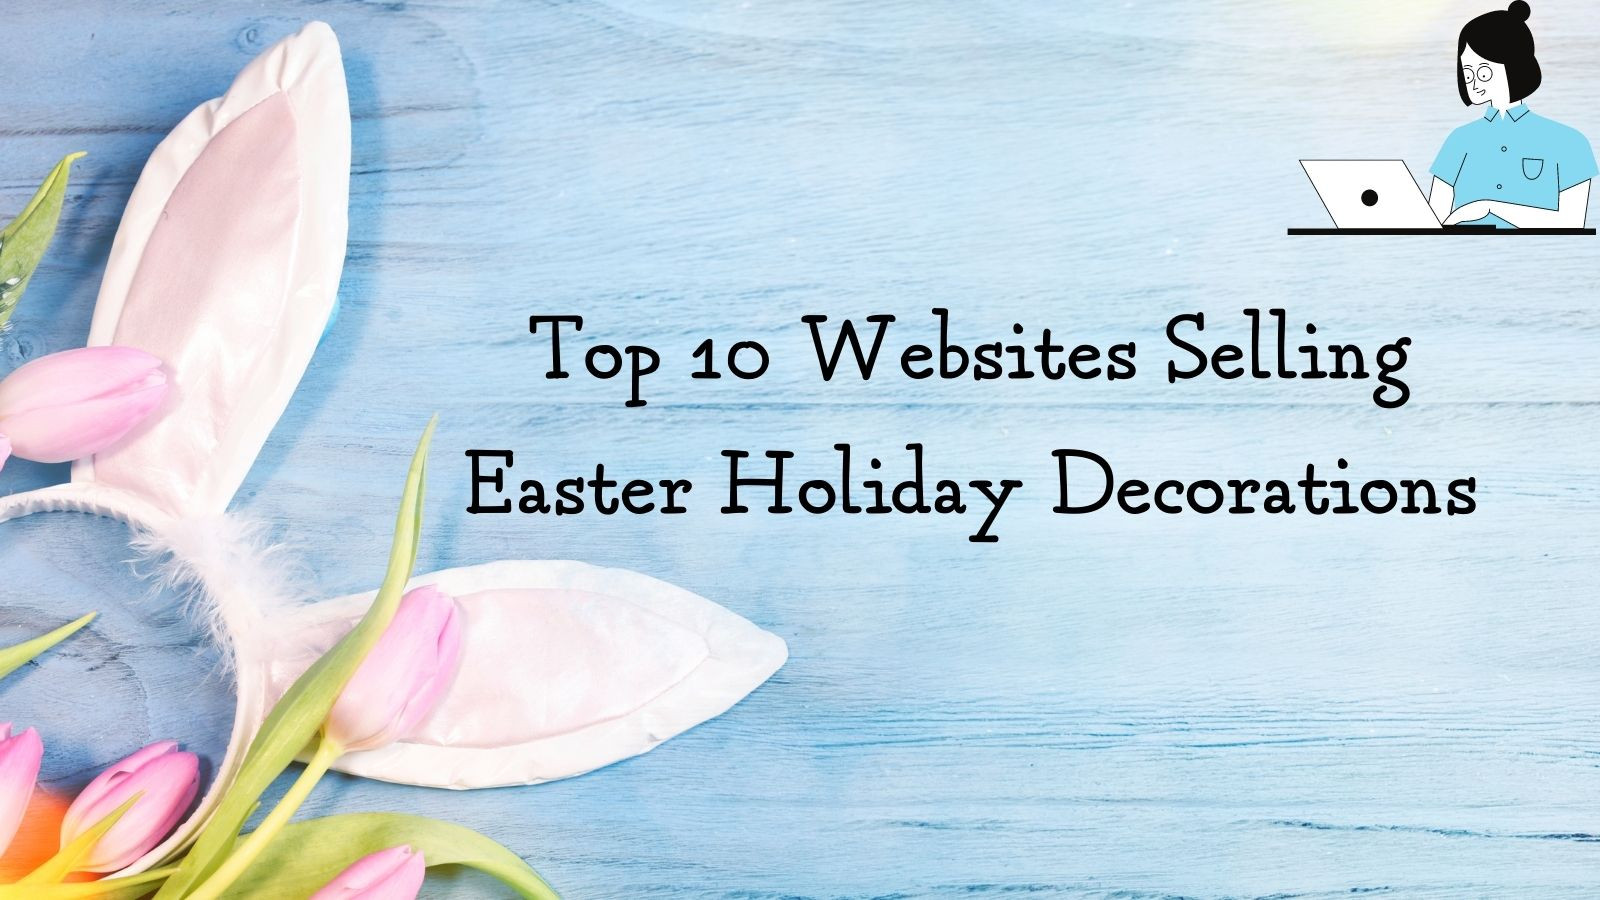 Top 10 Websites Selling Easter Holiday Decorations